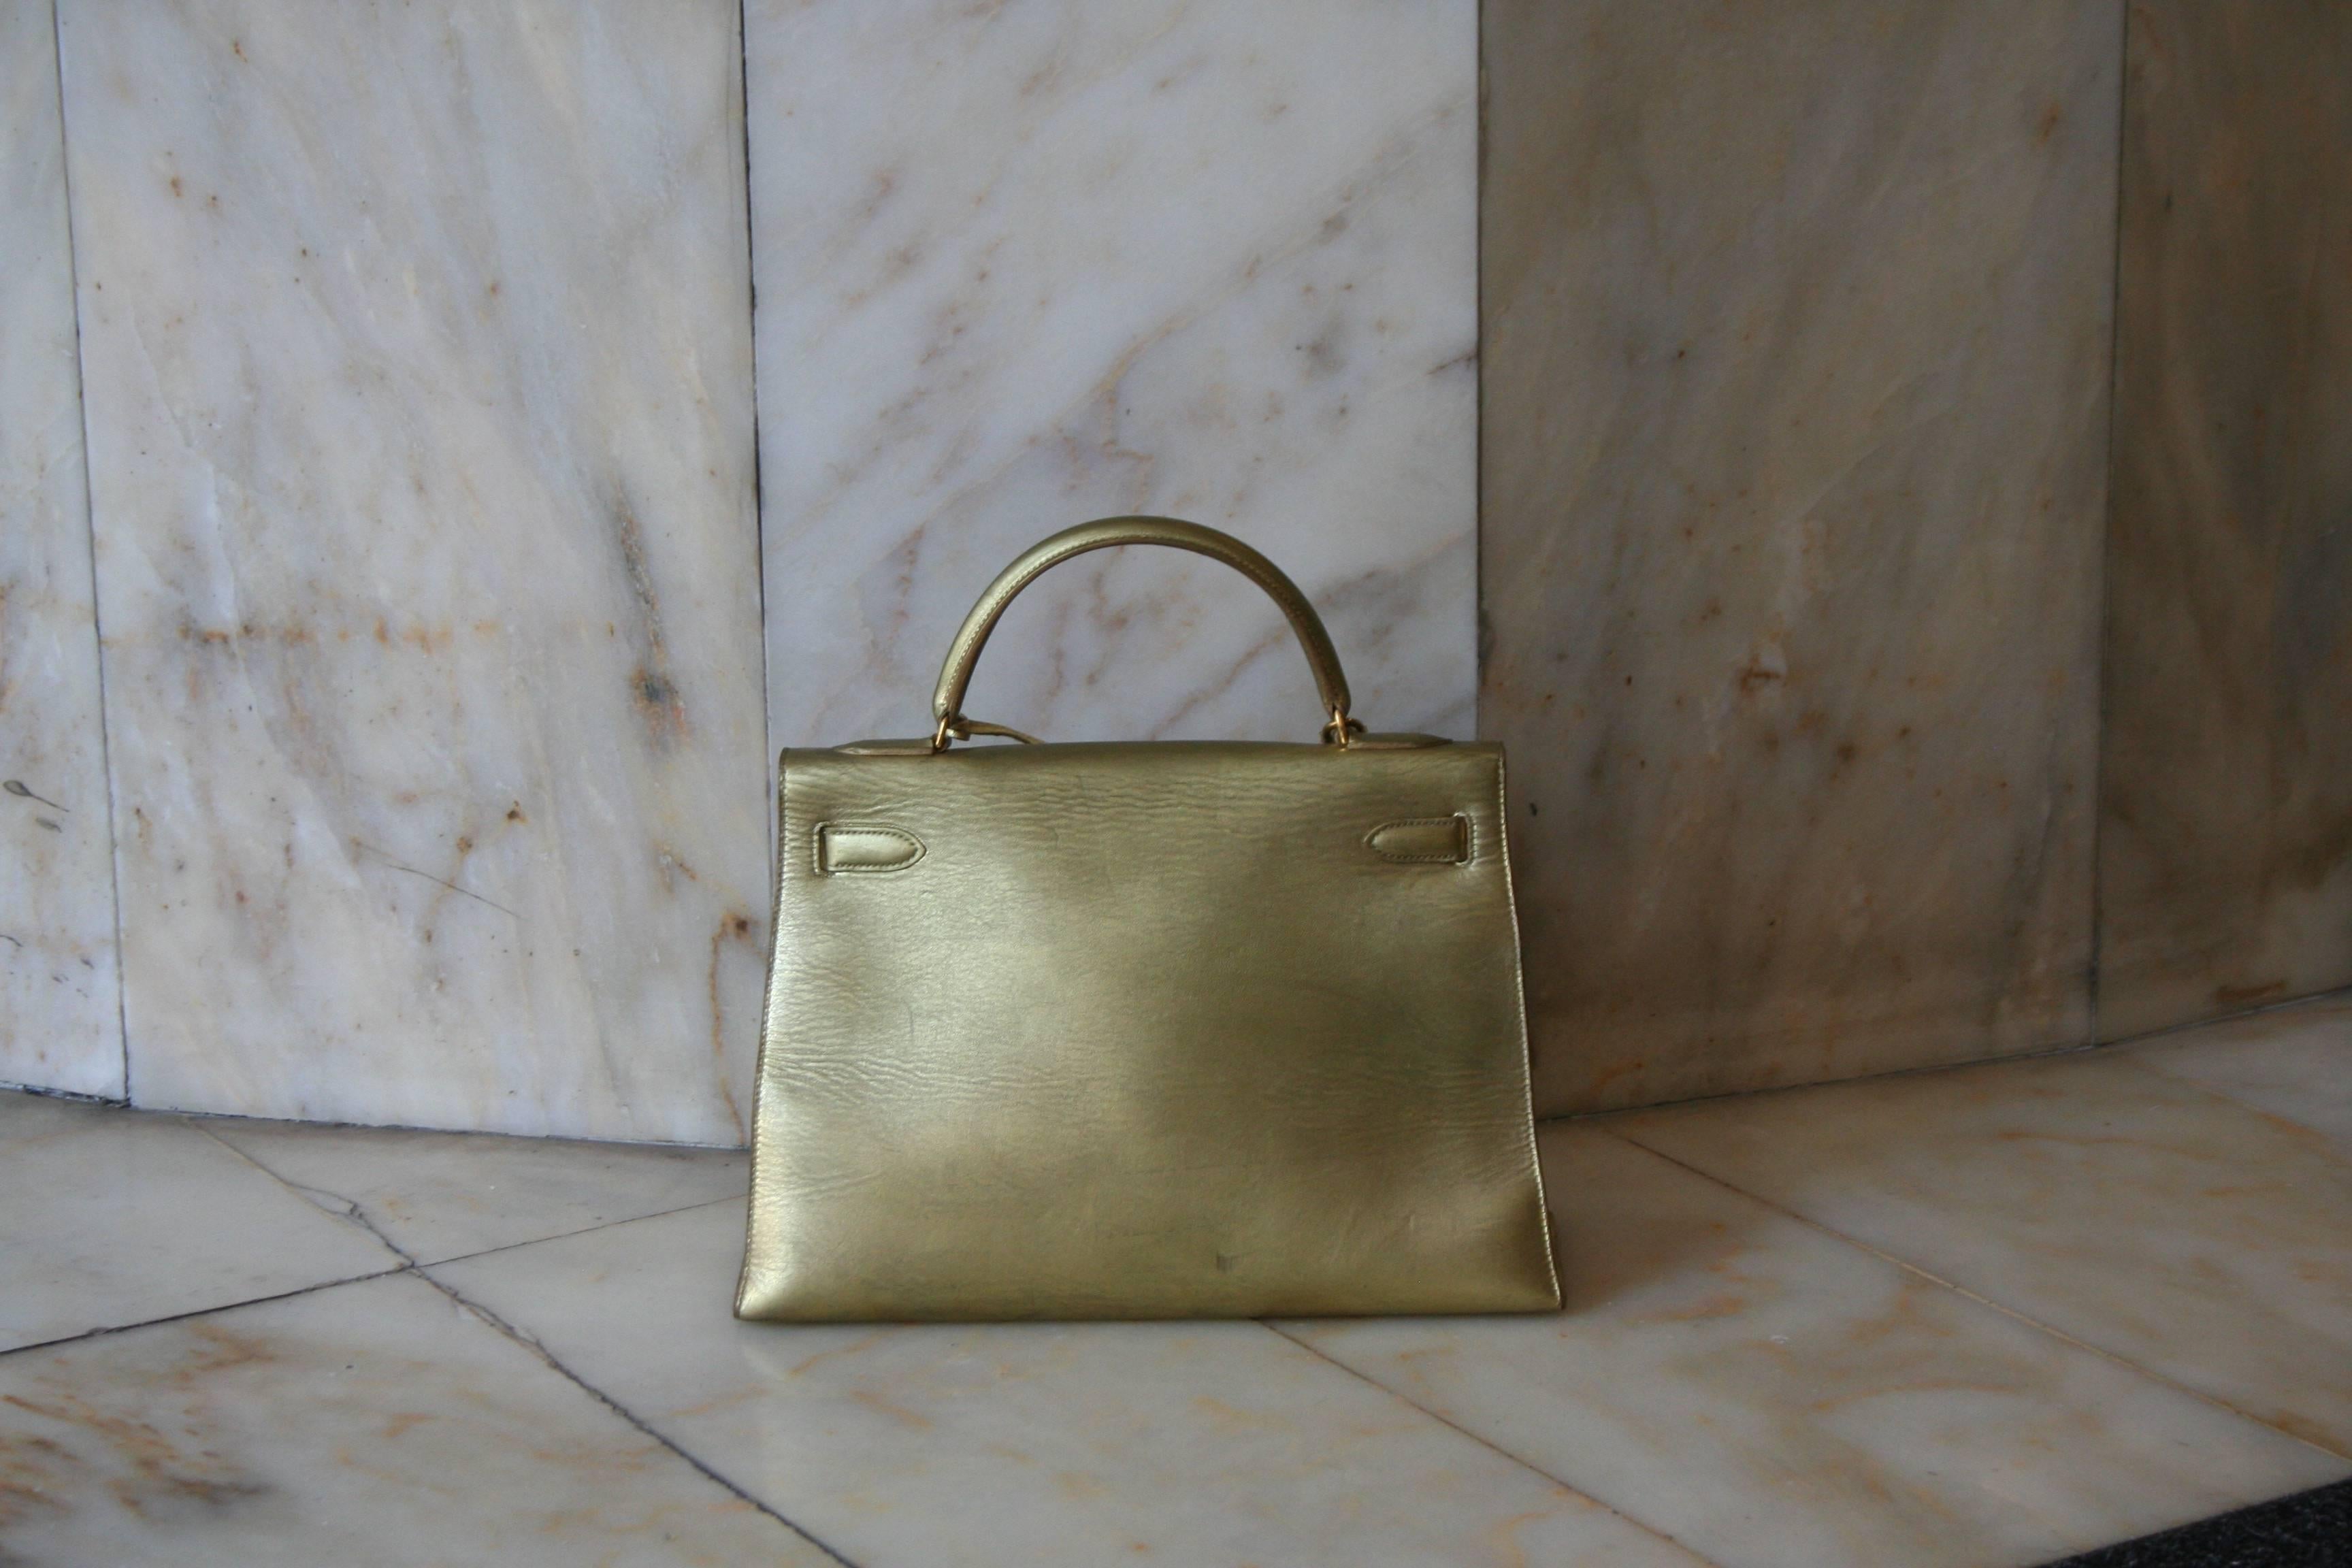 HERMES Kelly 32', Golden Colour, lining in lamb, gold hardware, key fob & padlock, handle. This bag was made for the decoration by Leila Menchari of the windows of Hermes in 1992. She did order to Hermes unique pieces by the choice of the skin